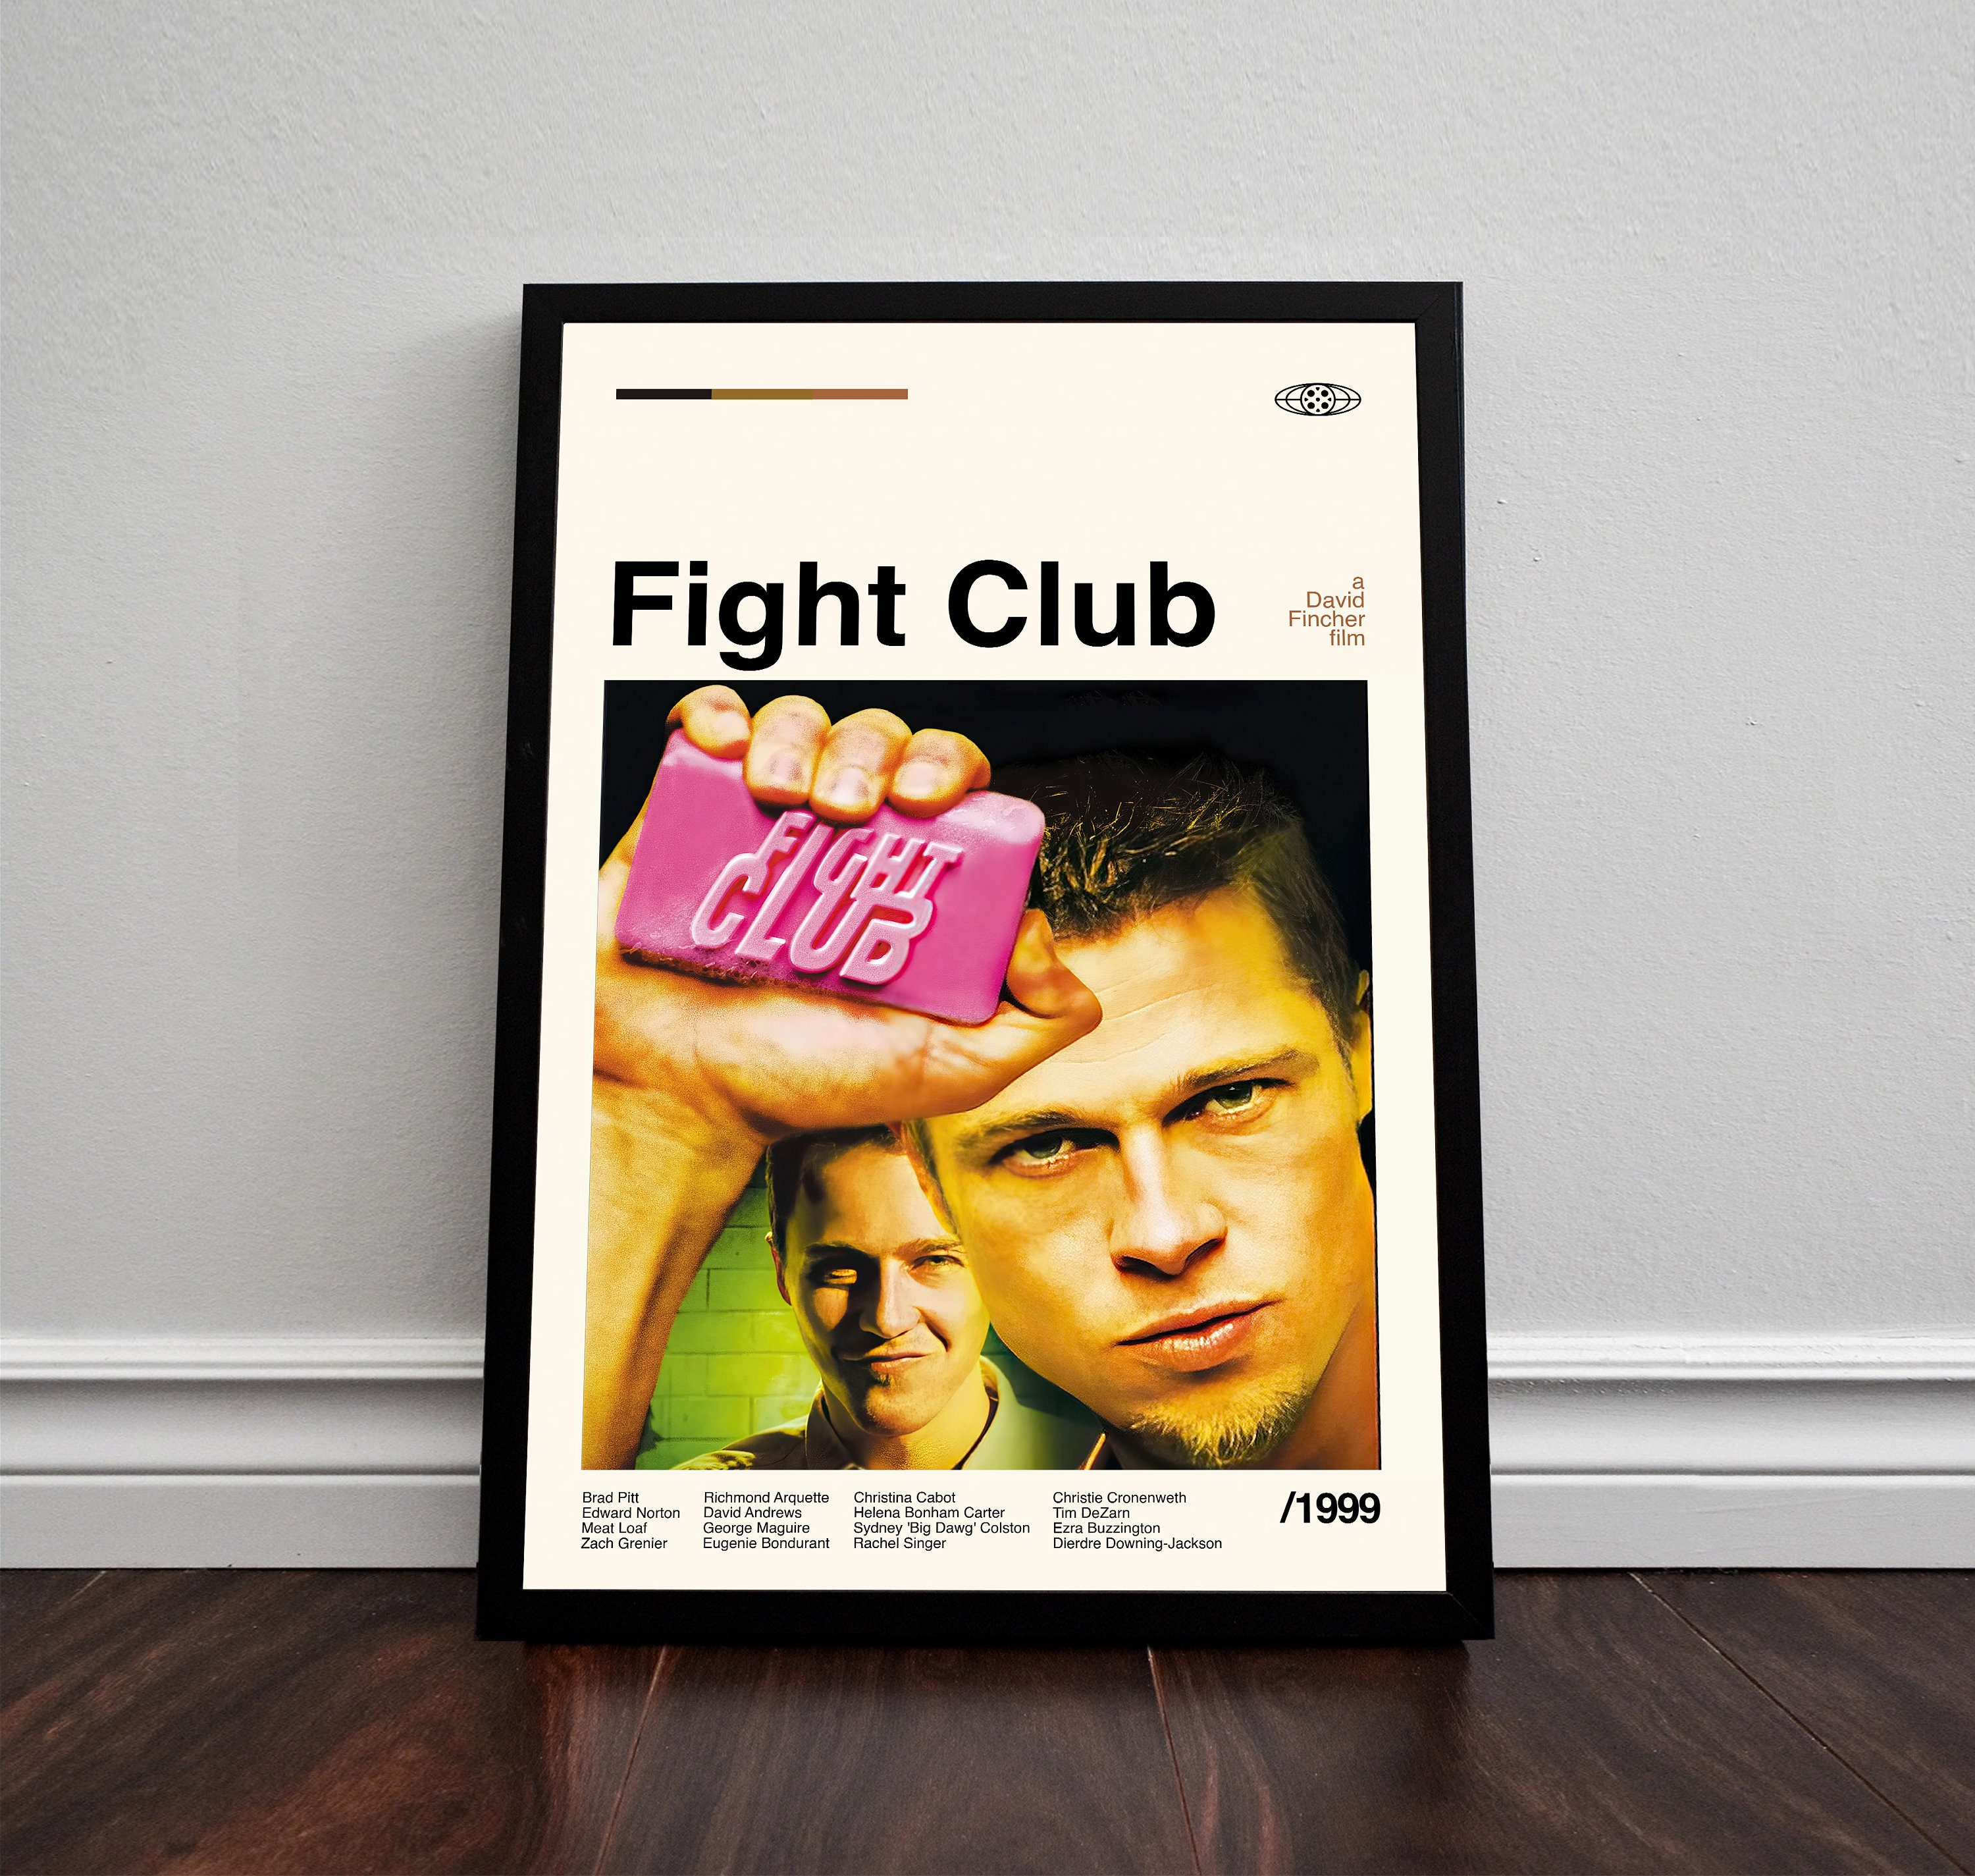 Discover Fight Club Poster, Fight Club, David Fincher Art, Vintage Modern, Abstract Poster, Minimalist Art, Wall Decor, High Quality, Custom Poster